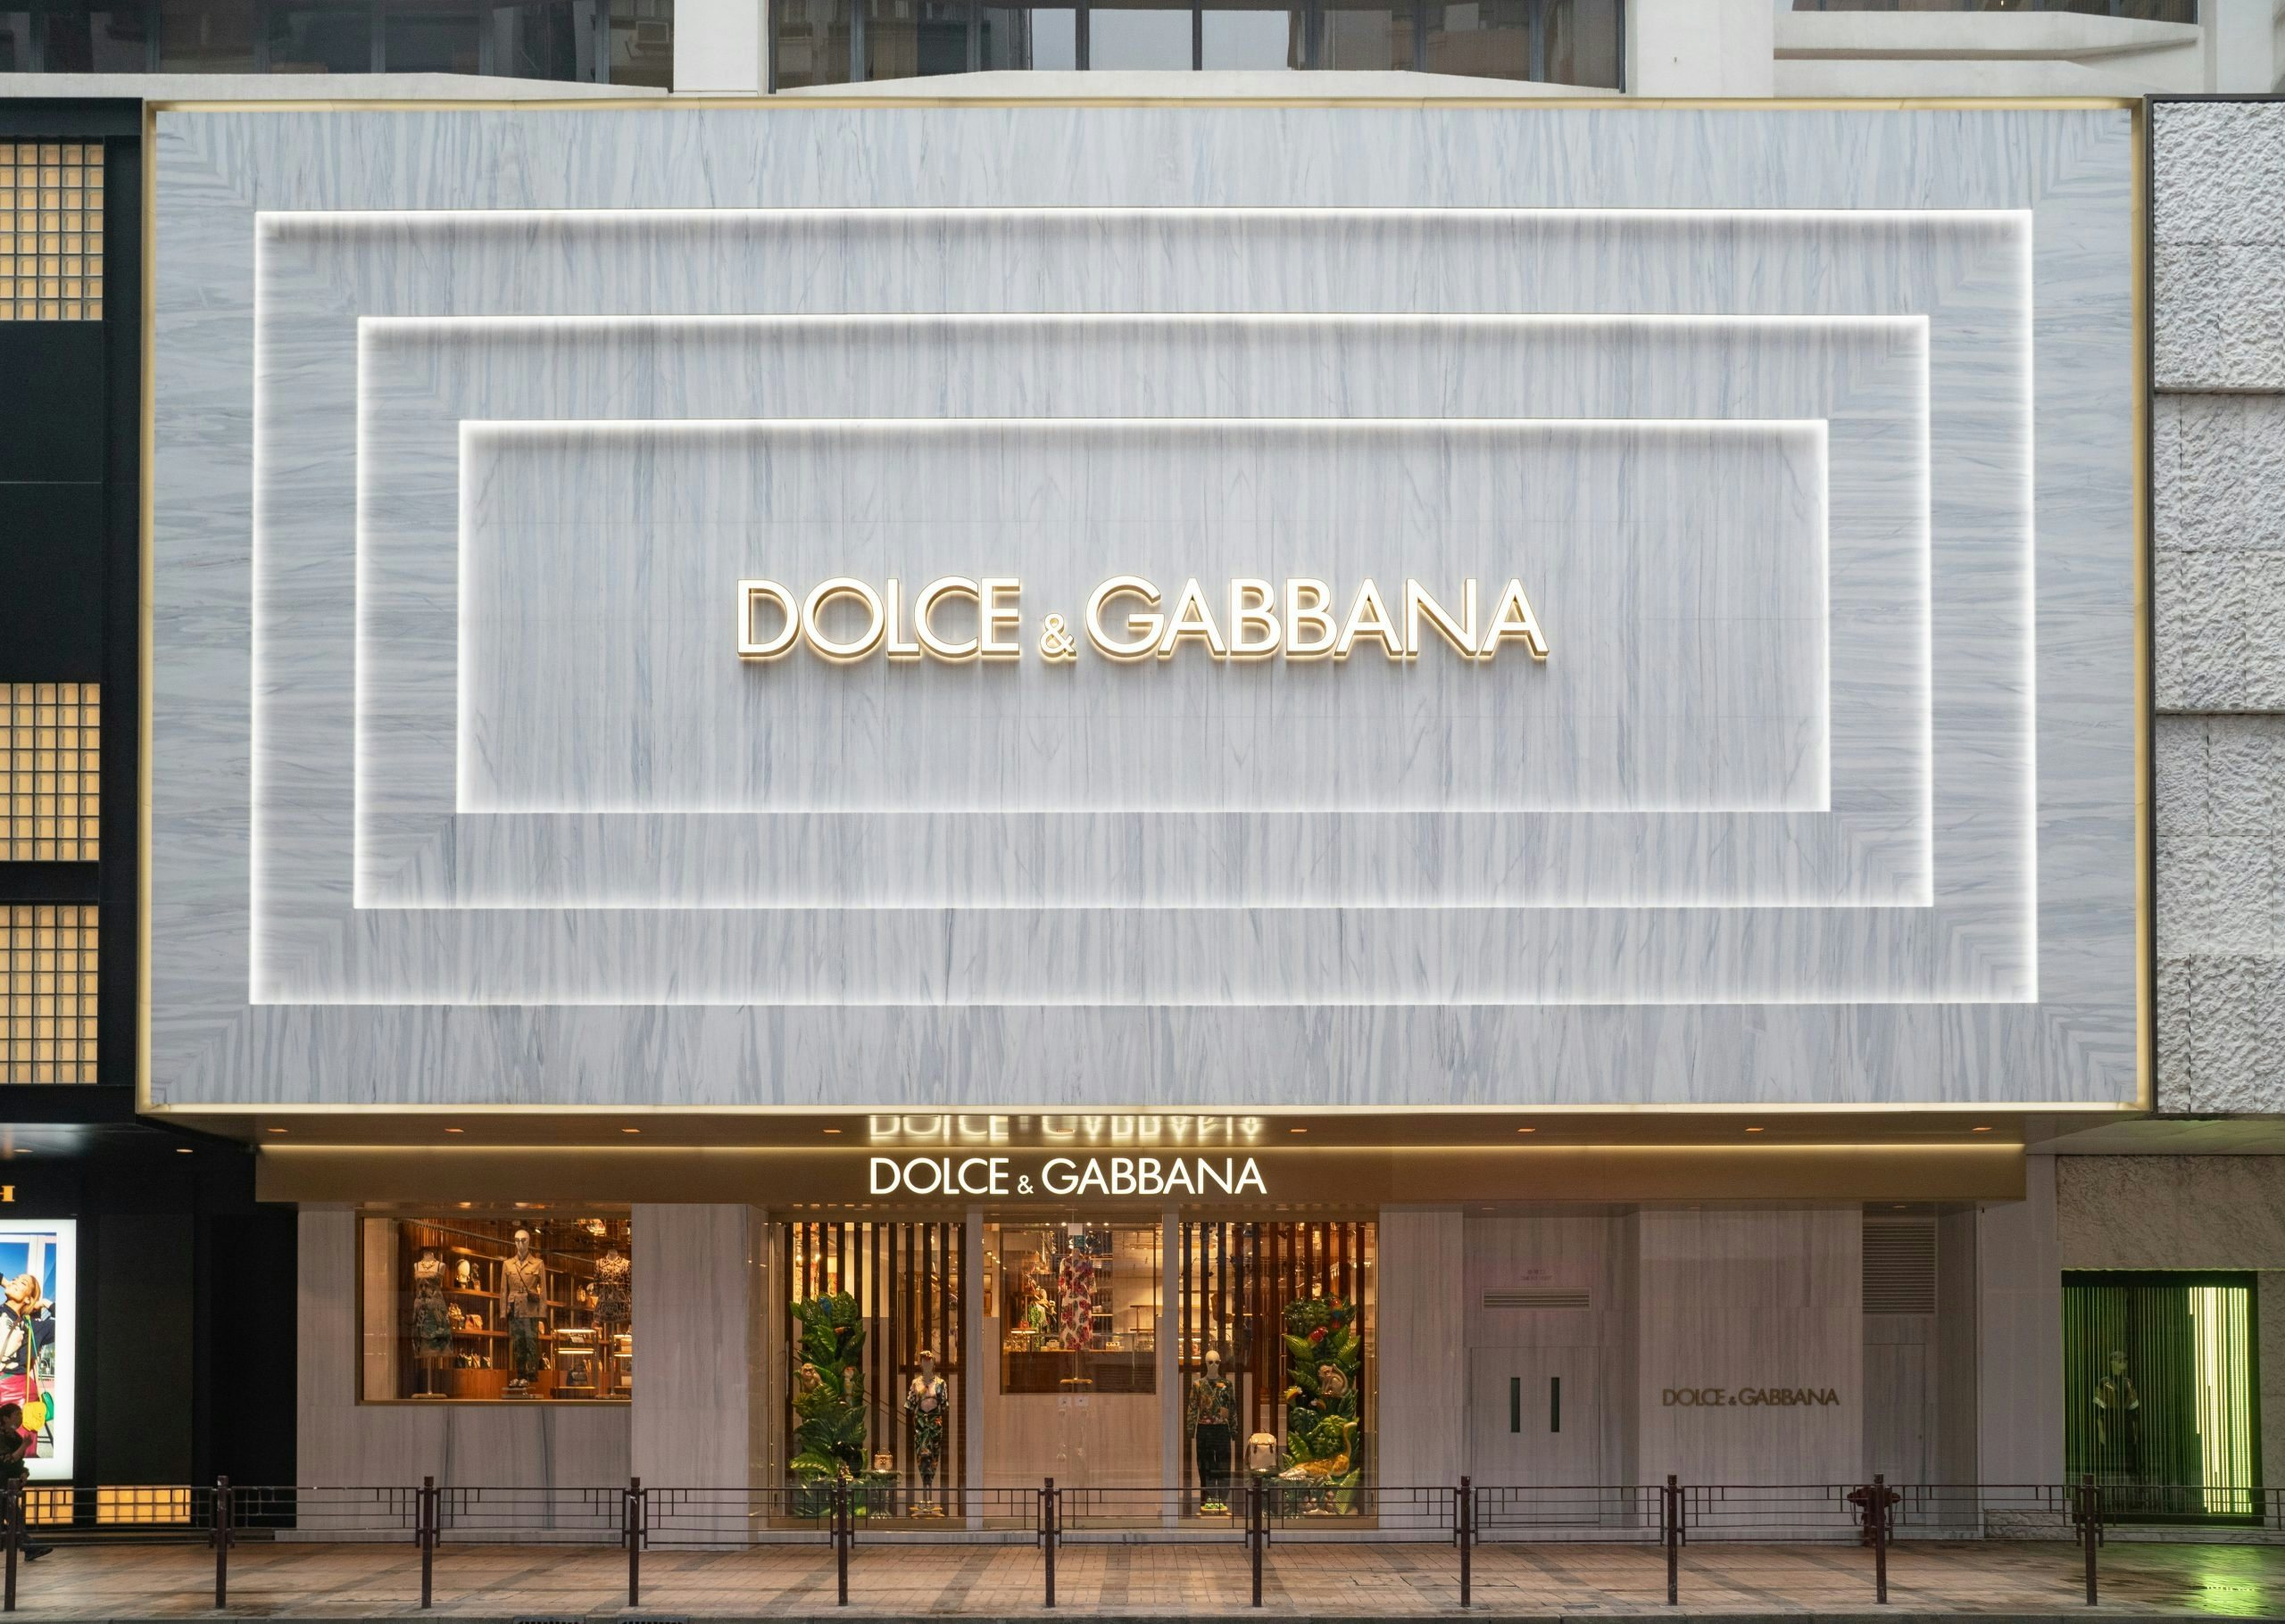 Dolce & Gabbana's revamped store on Canton Road, one of Hong Kong's main commercial arteries. Photo: Courtesy of Dolce & Gabbana